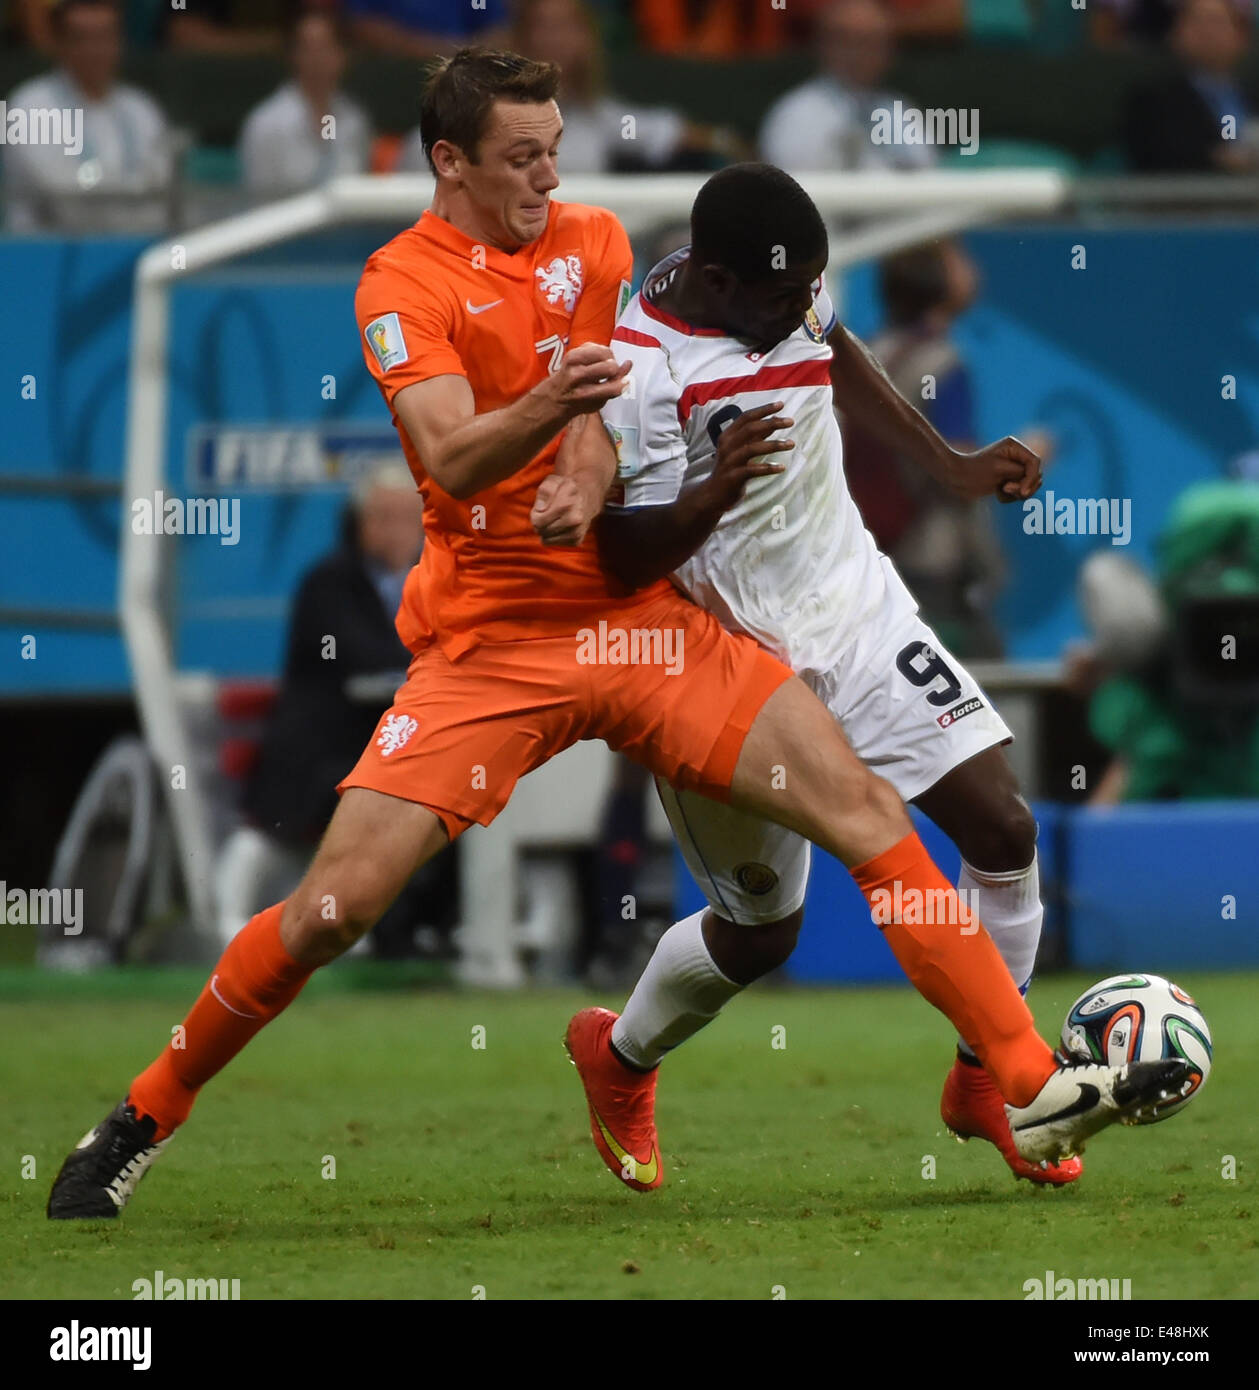 Salvador, Brazil. 5th July, 2014. Costa Rica's Joel Campbell (R) vies with Netherlands' Stefan de Vrij during a quarter-finals match between Netherlands and Costa Rica of 2014 FIFA World Cup at the Arena Fonte Nova Stadium in Salvador, Brazil, on July 5, 2014. Credit:  Guo Yong/Xinhua/Alamy Live News Stock Photo